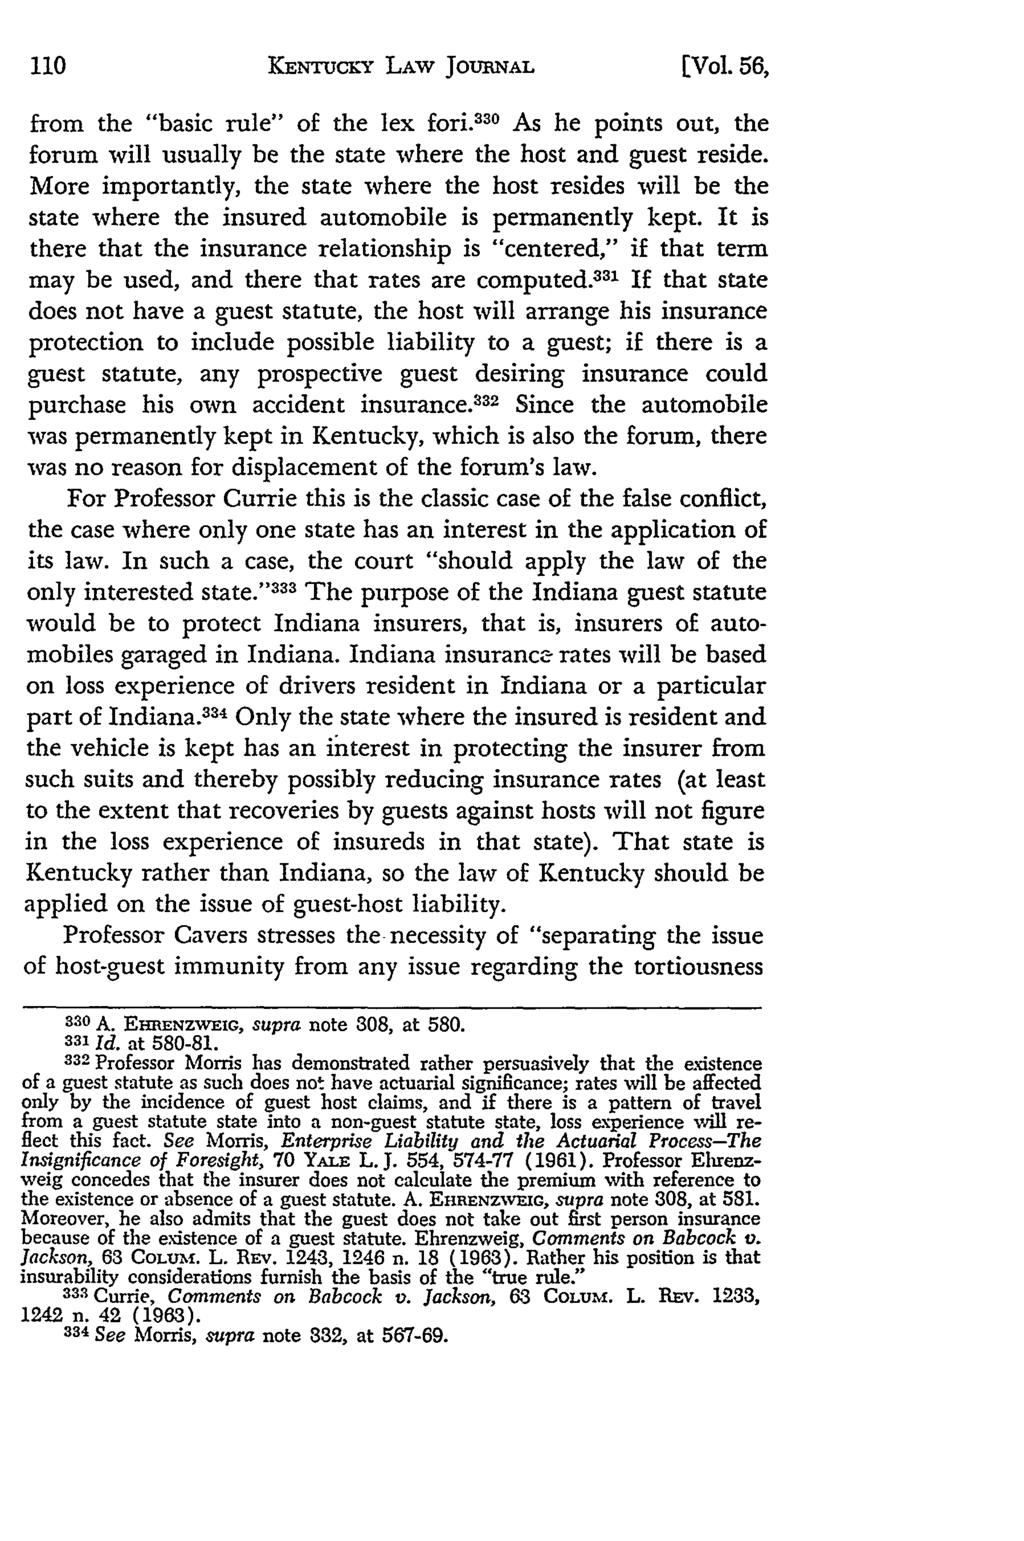 KENTUCKfy LAW JOUNAL [Vol. 56, from the "basic rule" of the lex fori. 330 As he points out, the forum will usually be the state where the host and guest reside.